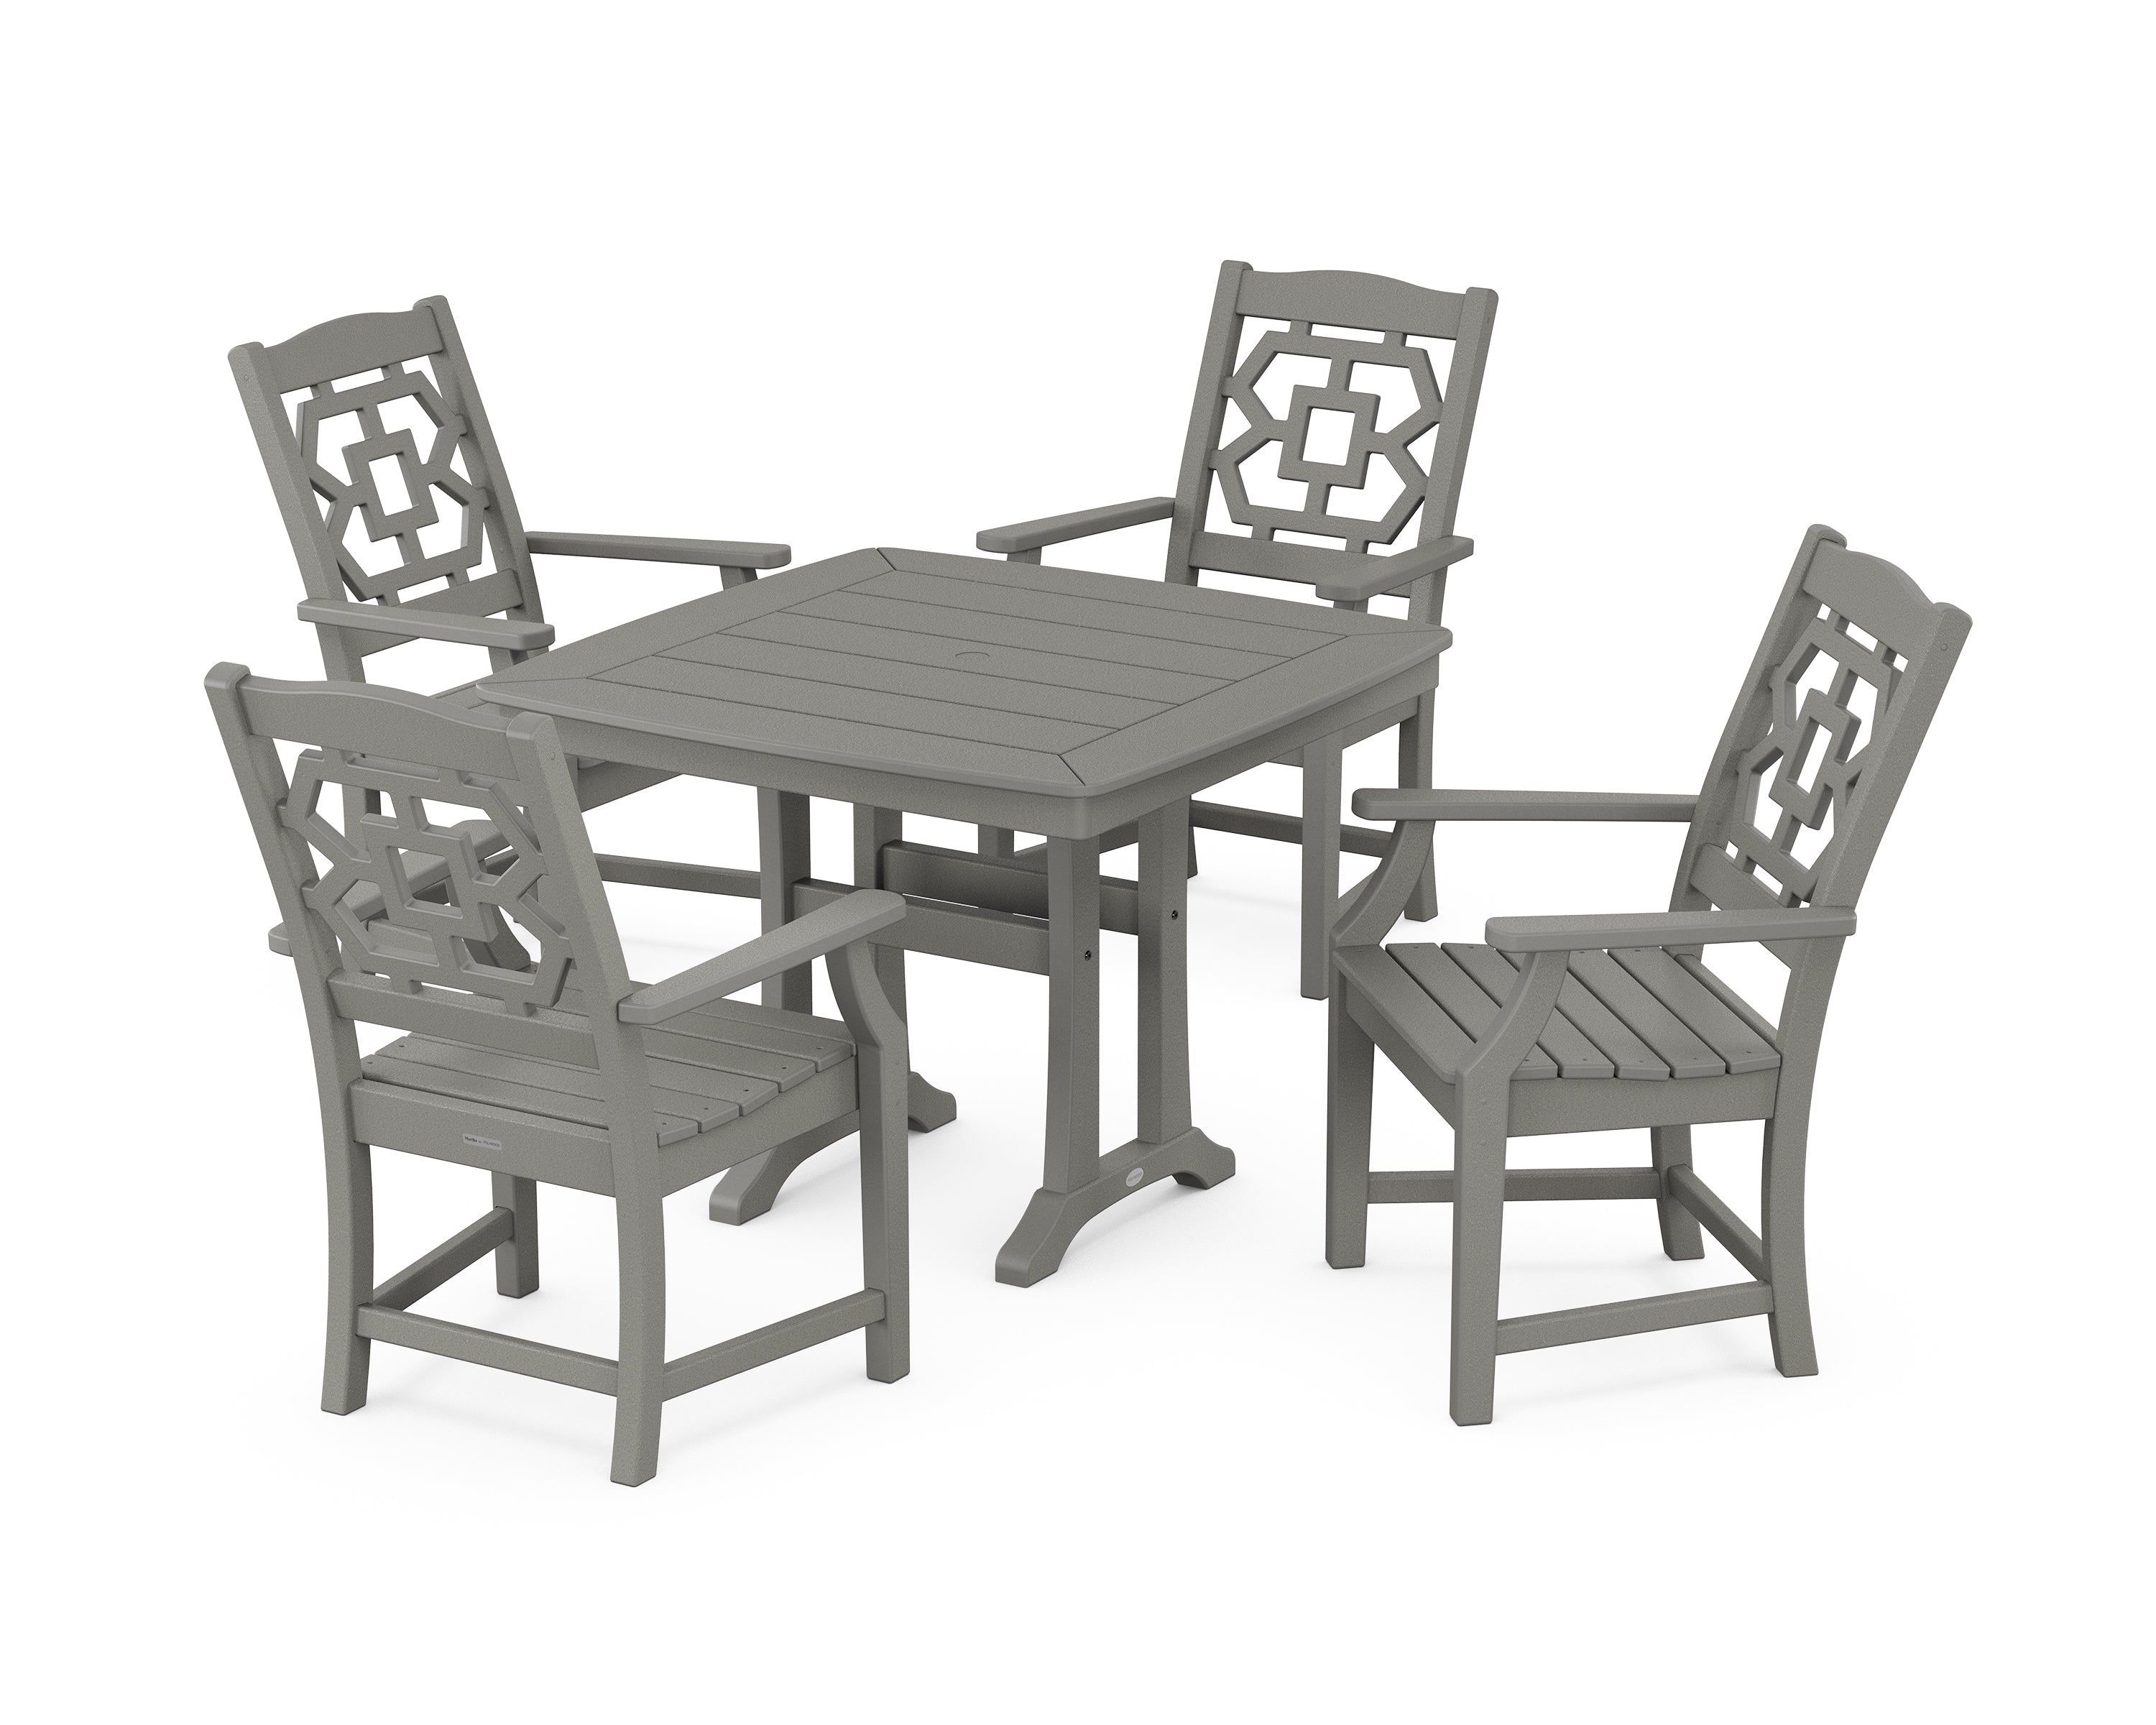 Martha Stewart by POLYWOOD® Chinoiserie 5-Piece Dining Set with Trestle Legs in Slate Grey